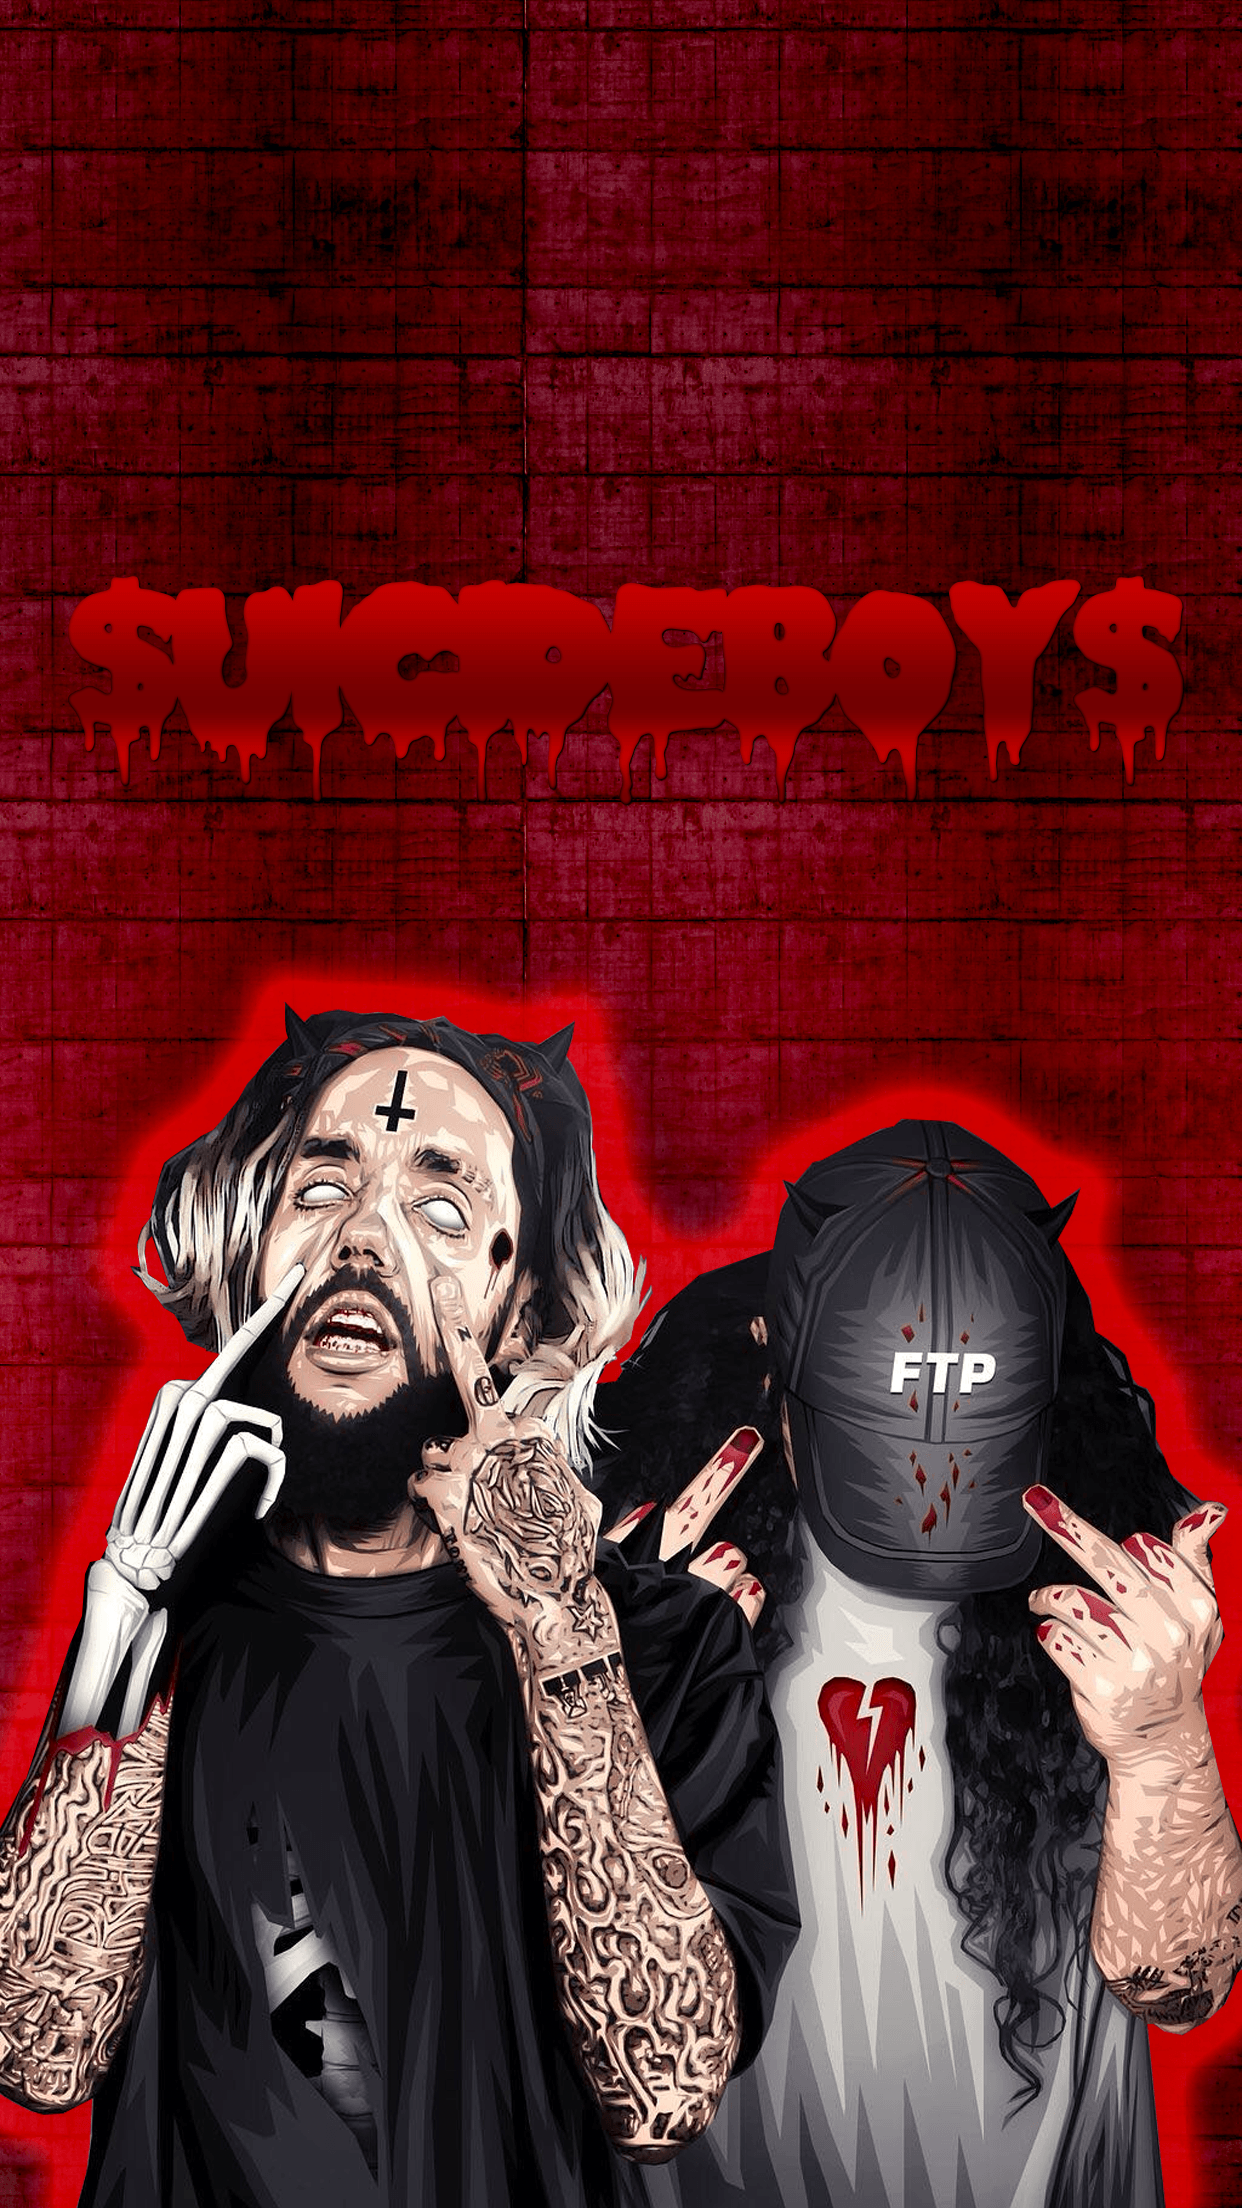 Ruby $uicideboy$ Wallpapers - Wallpaper Cave